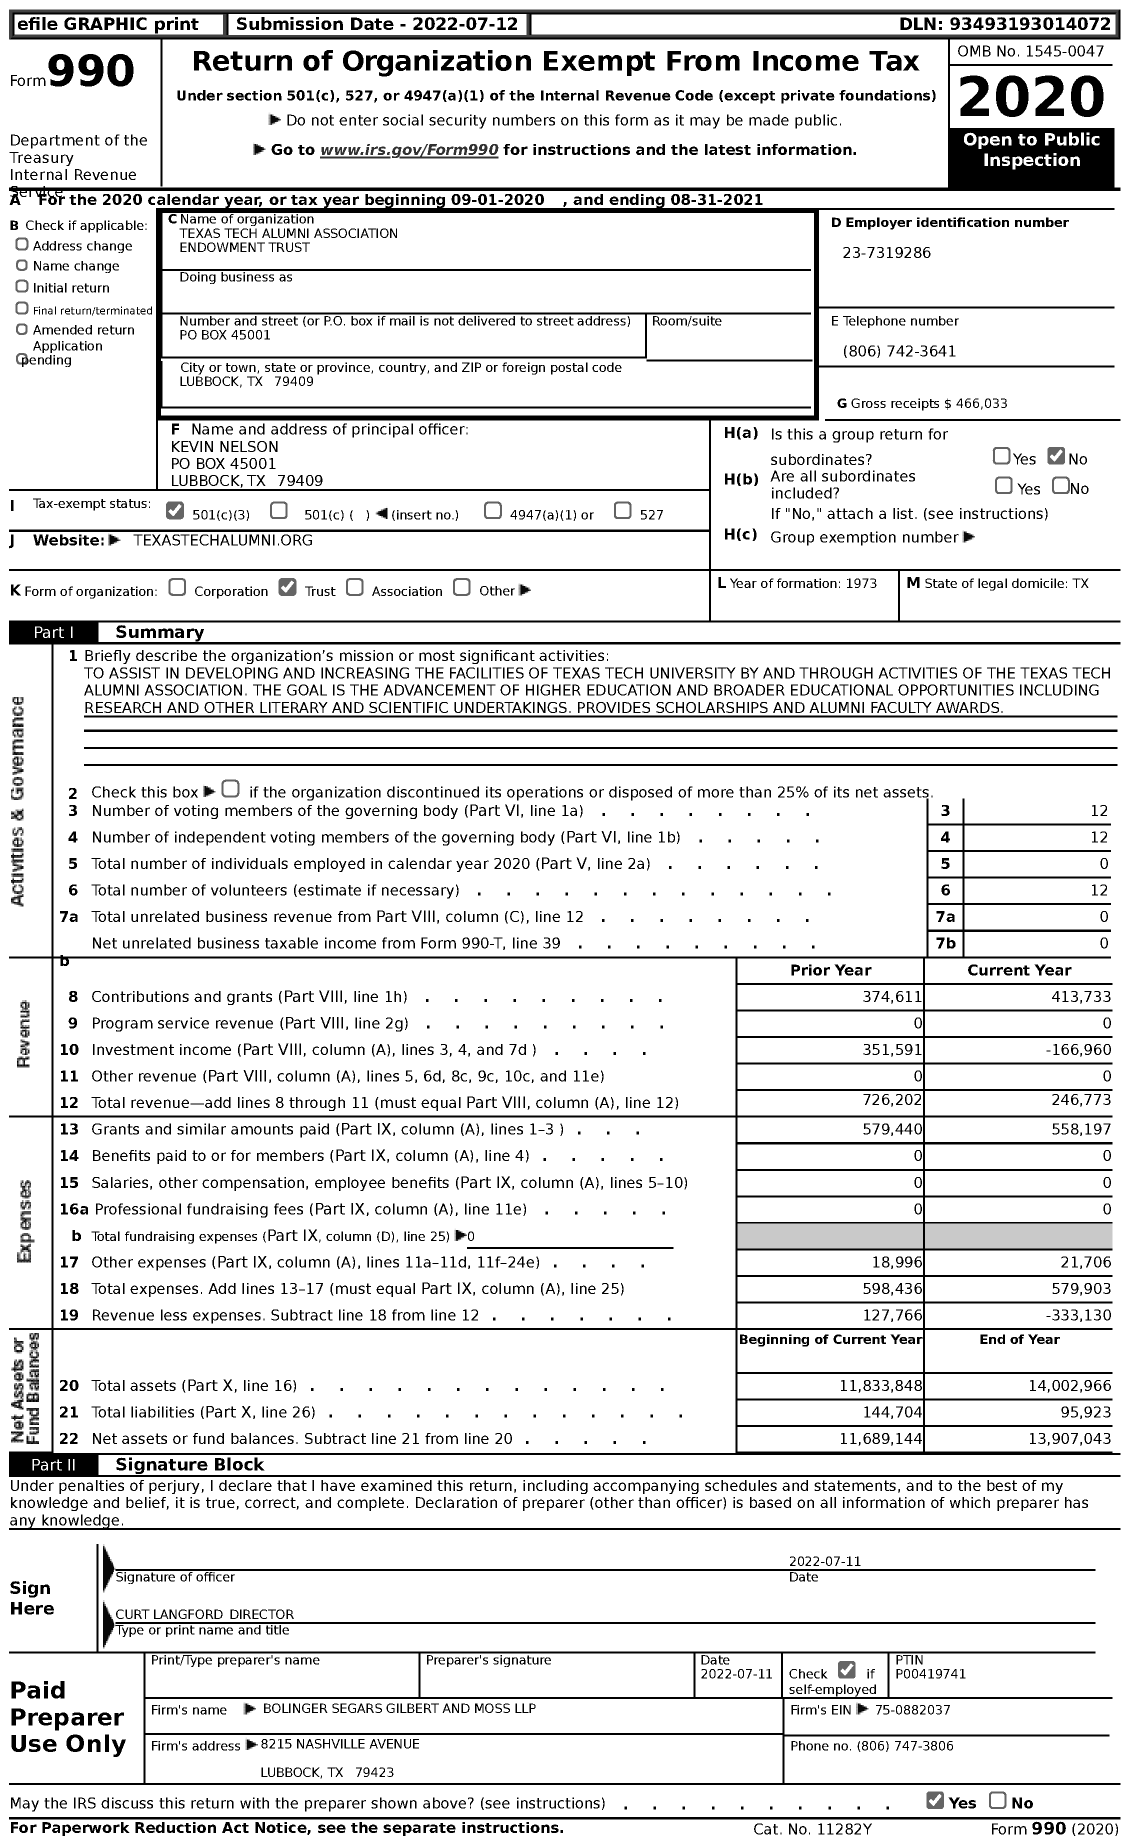 Image of first page of 2020 Form 990 for Texas Tech Alumni Association Endowment Trust